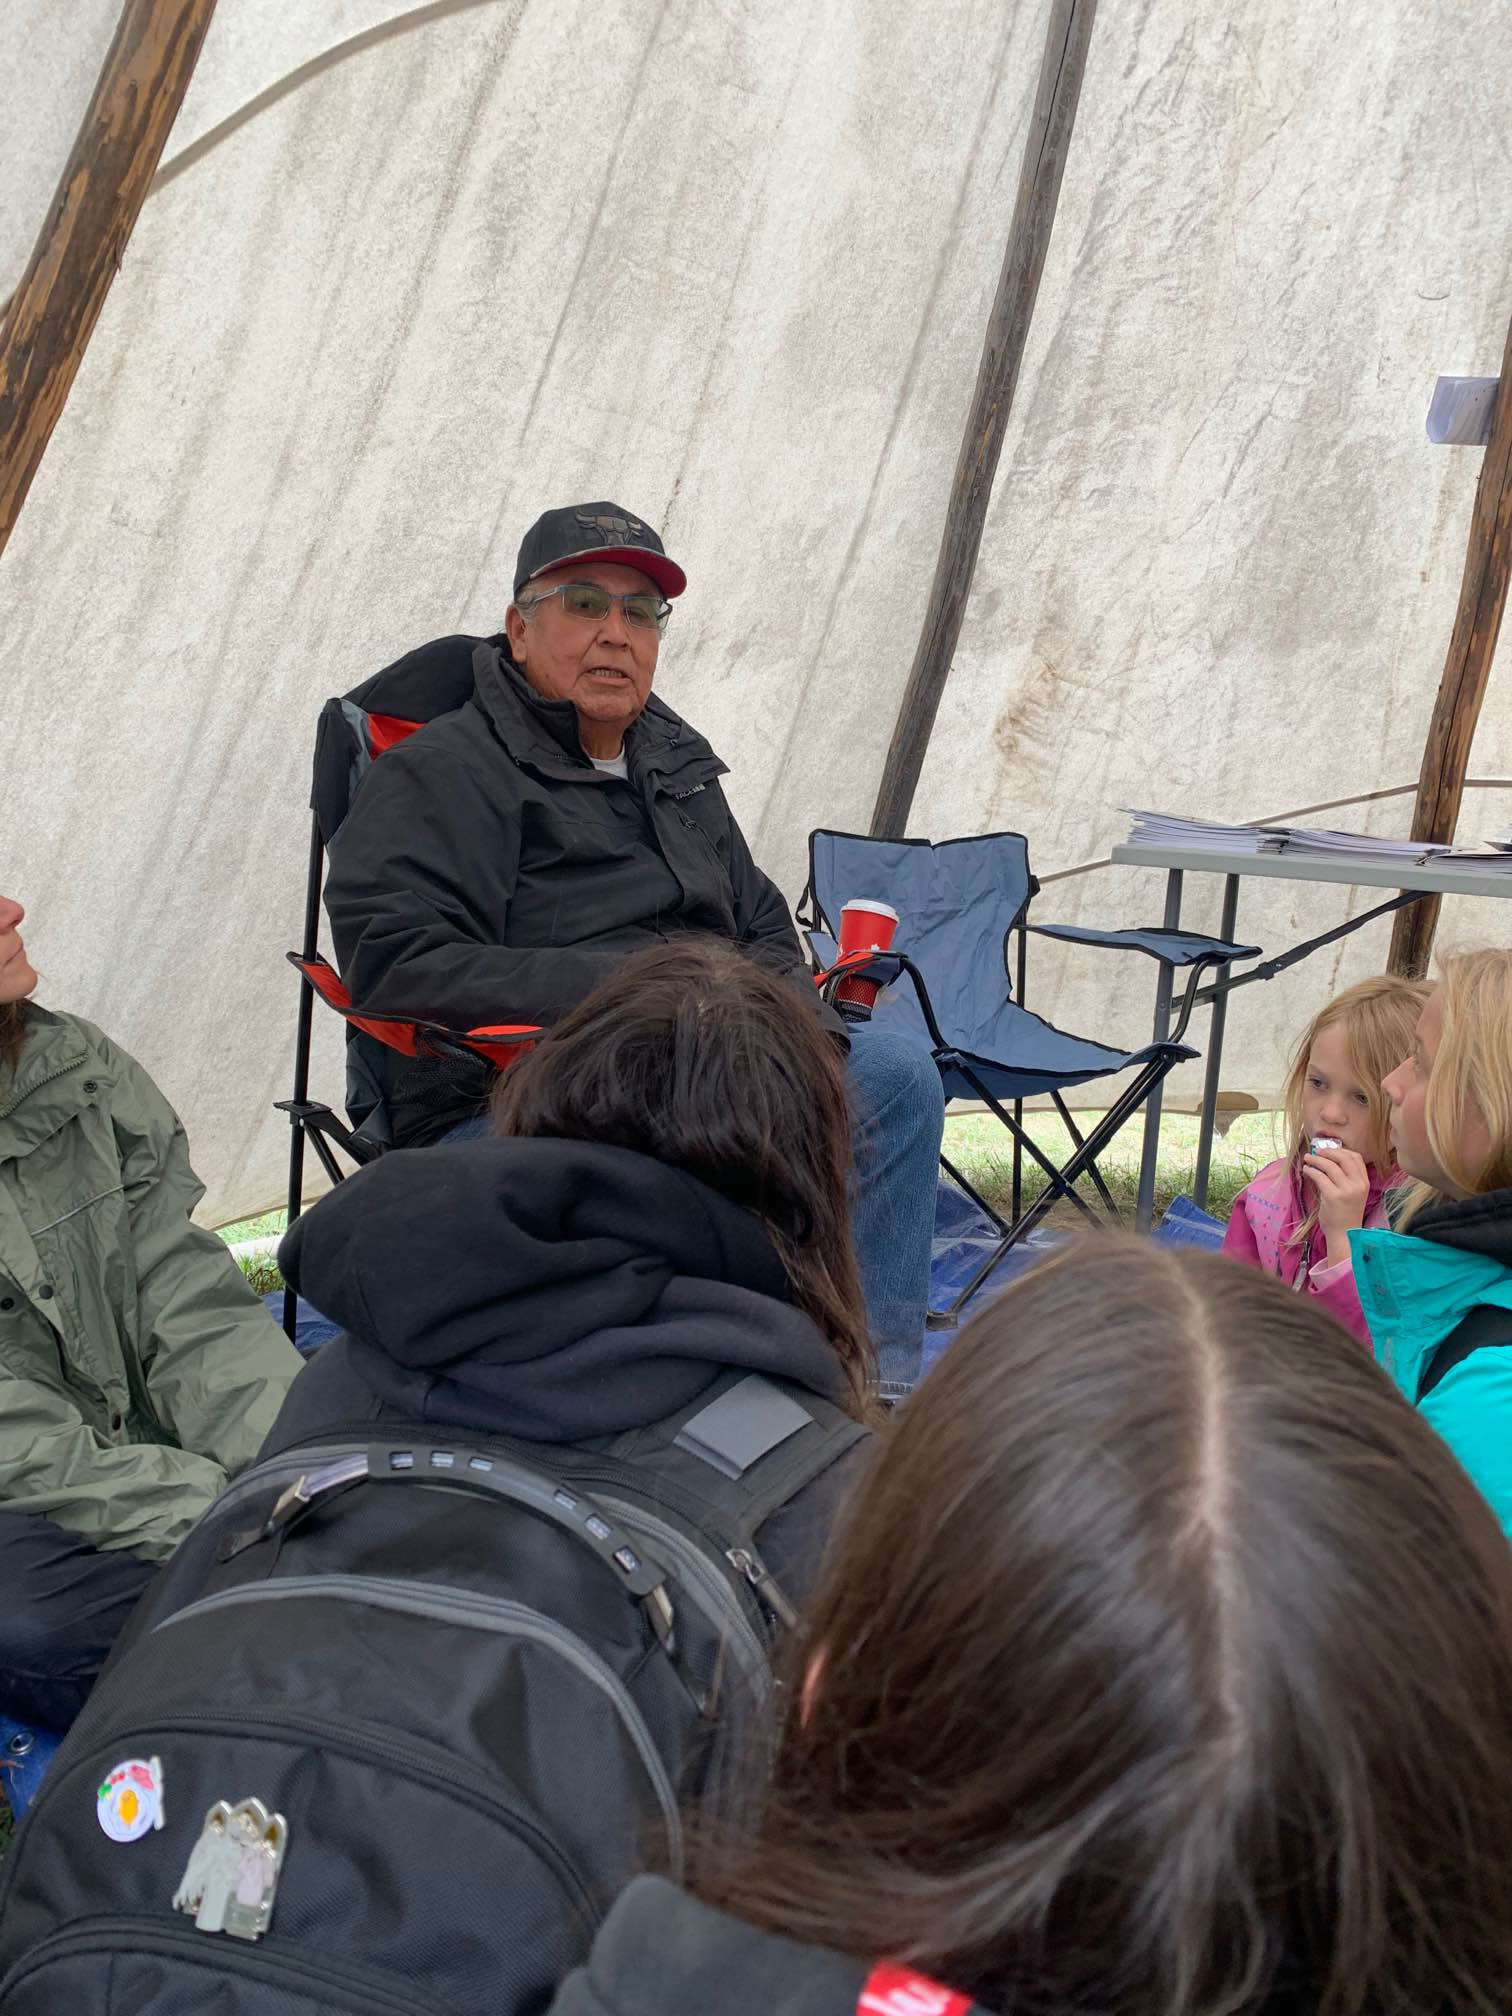 Elder Clyde O'Watch sharing knowledge about traditional tobacco.